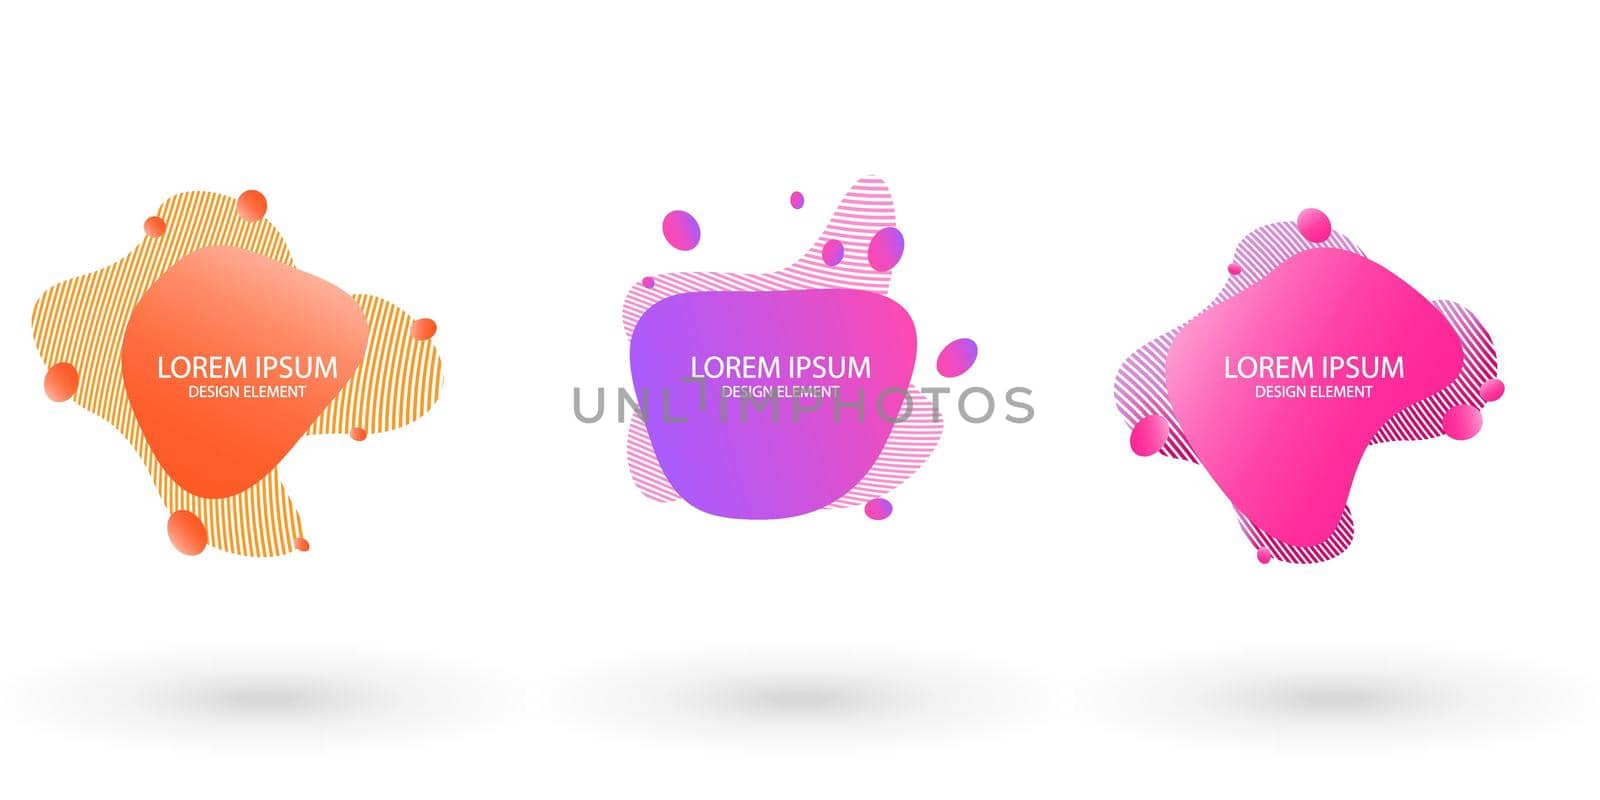 Fluid frame isolated on white background. Set of abstract liquid shapes, colorful elements, gradient waves with geometric lines, dynamical forms. Vector flat design for banners, flyers, business cards